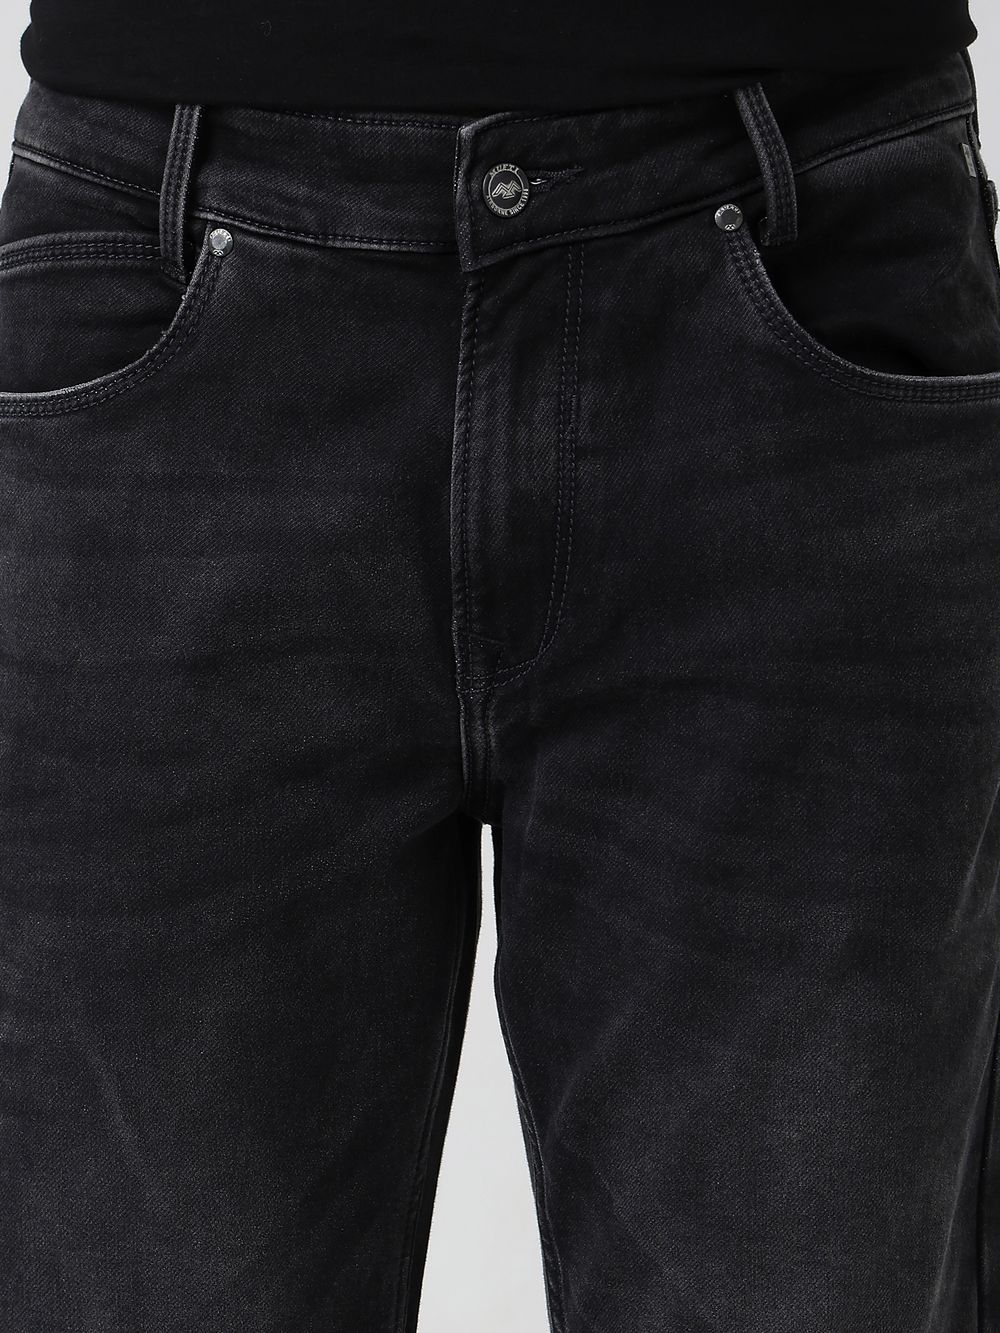 Black Straight Fit Denim Deluxe Stretch Jeans